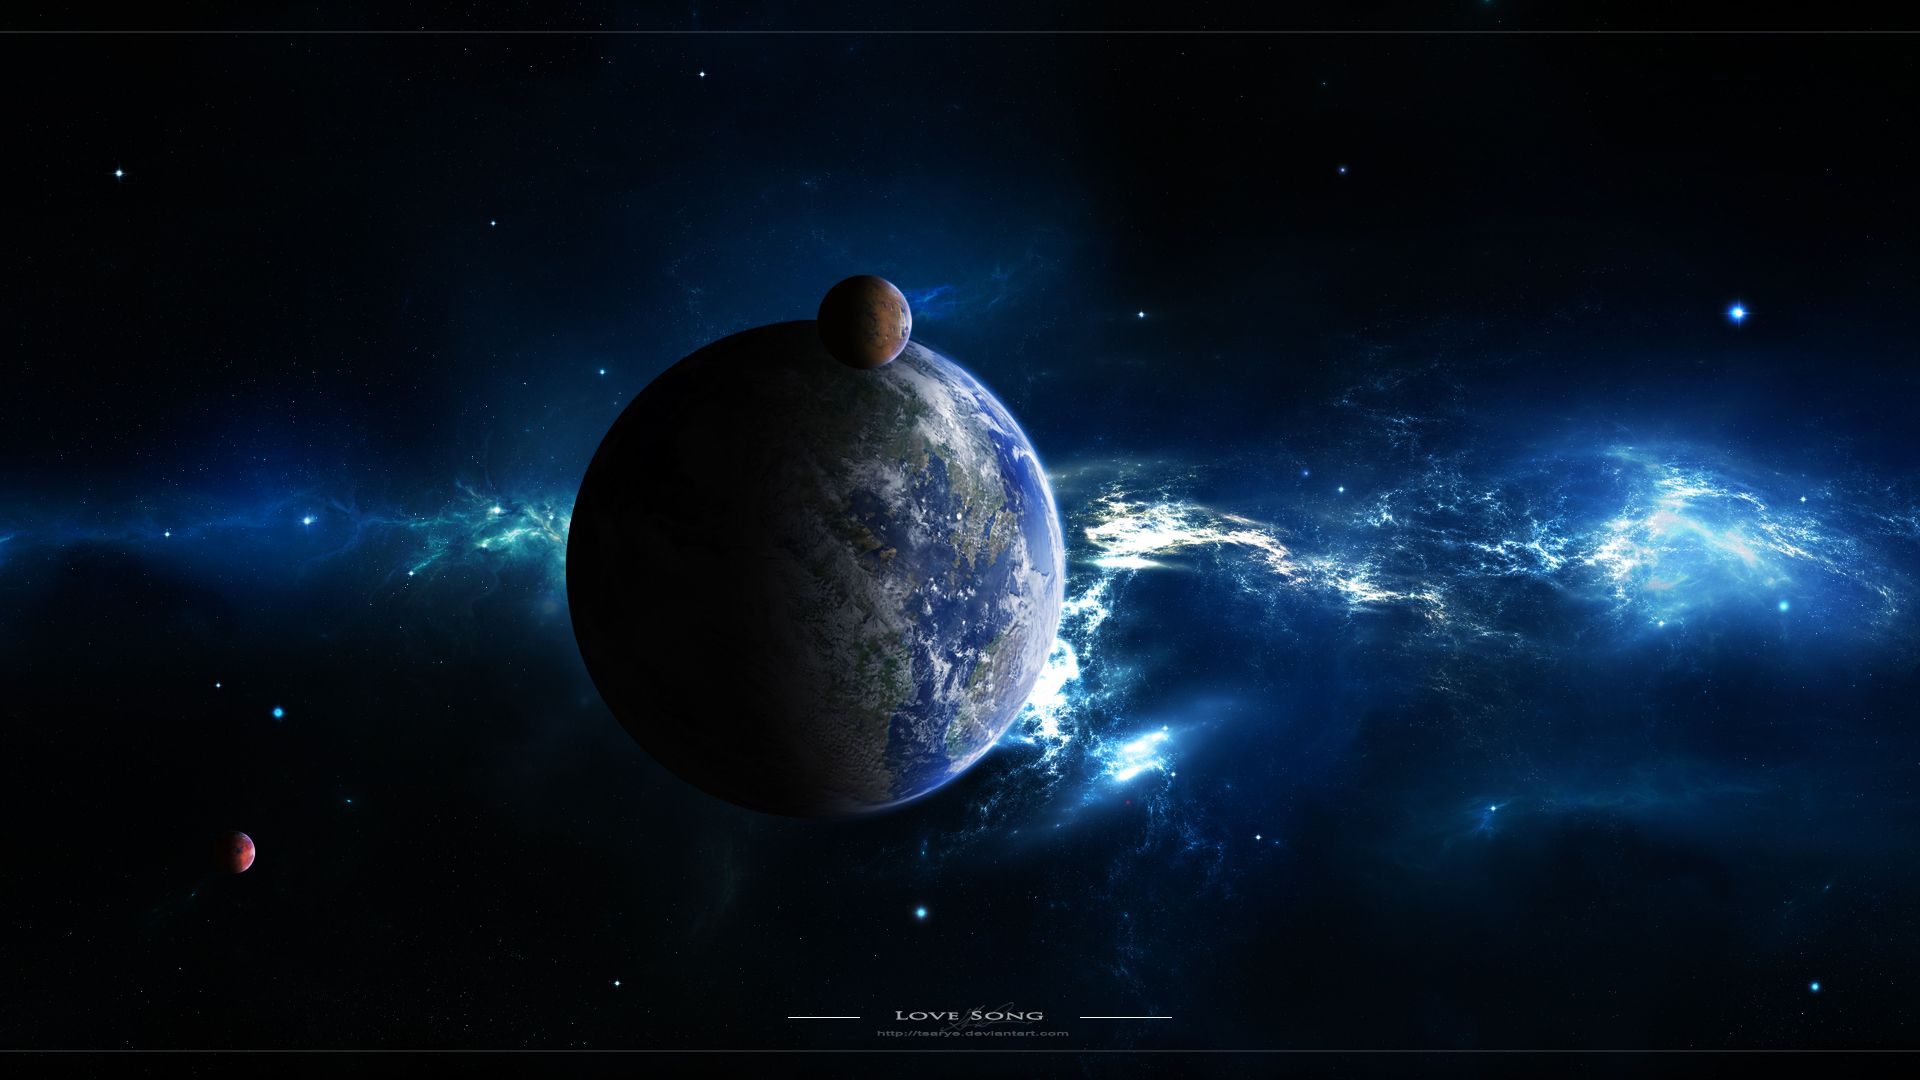 Space Hd Wallpapers 1920x1080 (page 3) - Pics about space